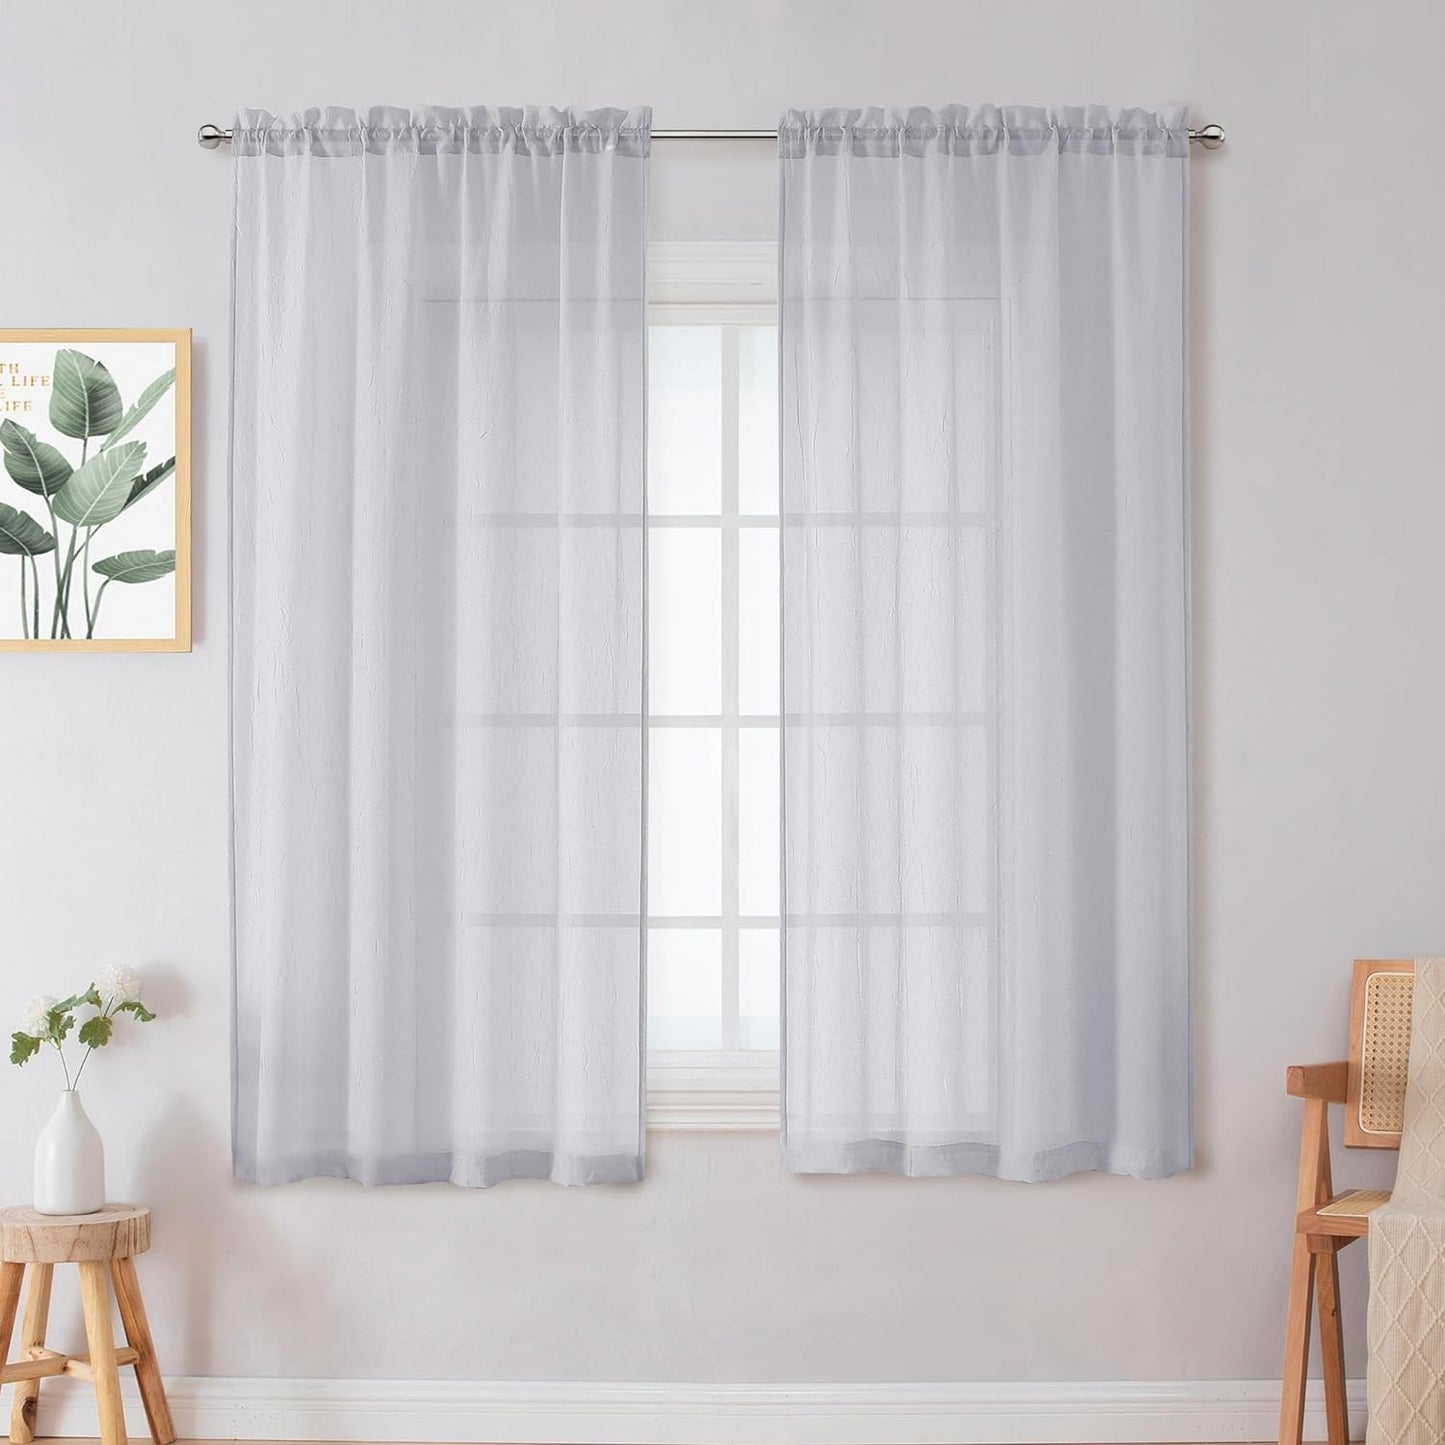 Chyhomenyc Crushed White Sheer Valances for Window 14 Inch Length 2 PCS, Crinkle Voile Short Kitchen Curtains with Dual Rod Pockets，Gauzy Bedroom Curtain Valance，Each 42Wx14L Inches  Chyhomenyc Light Grey 42 W X 63 L 